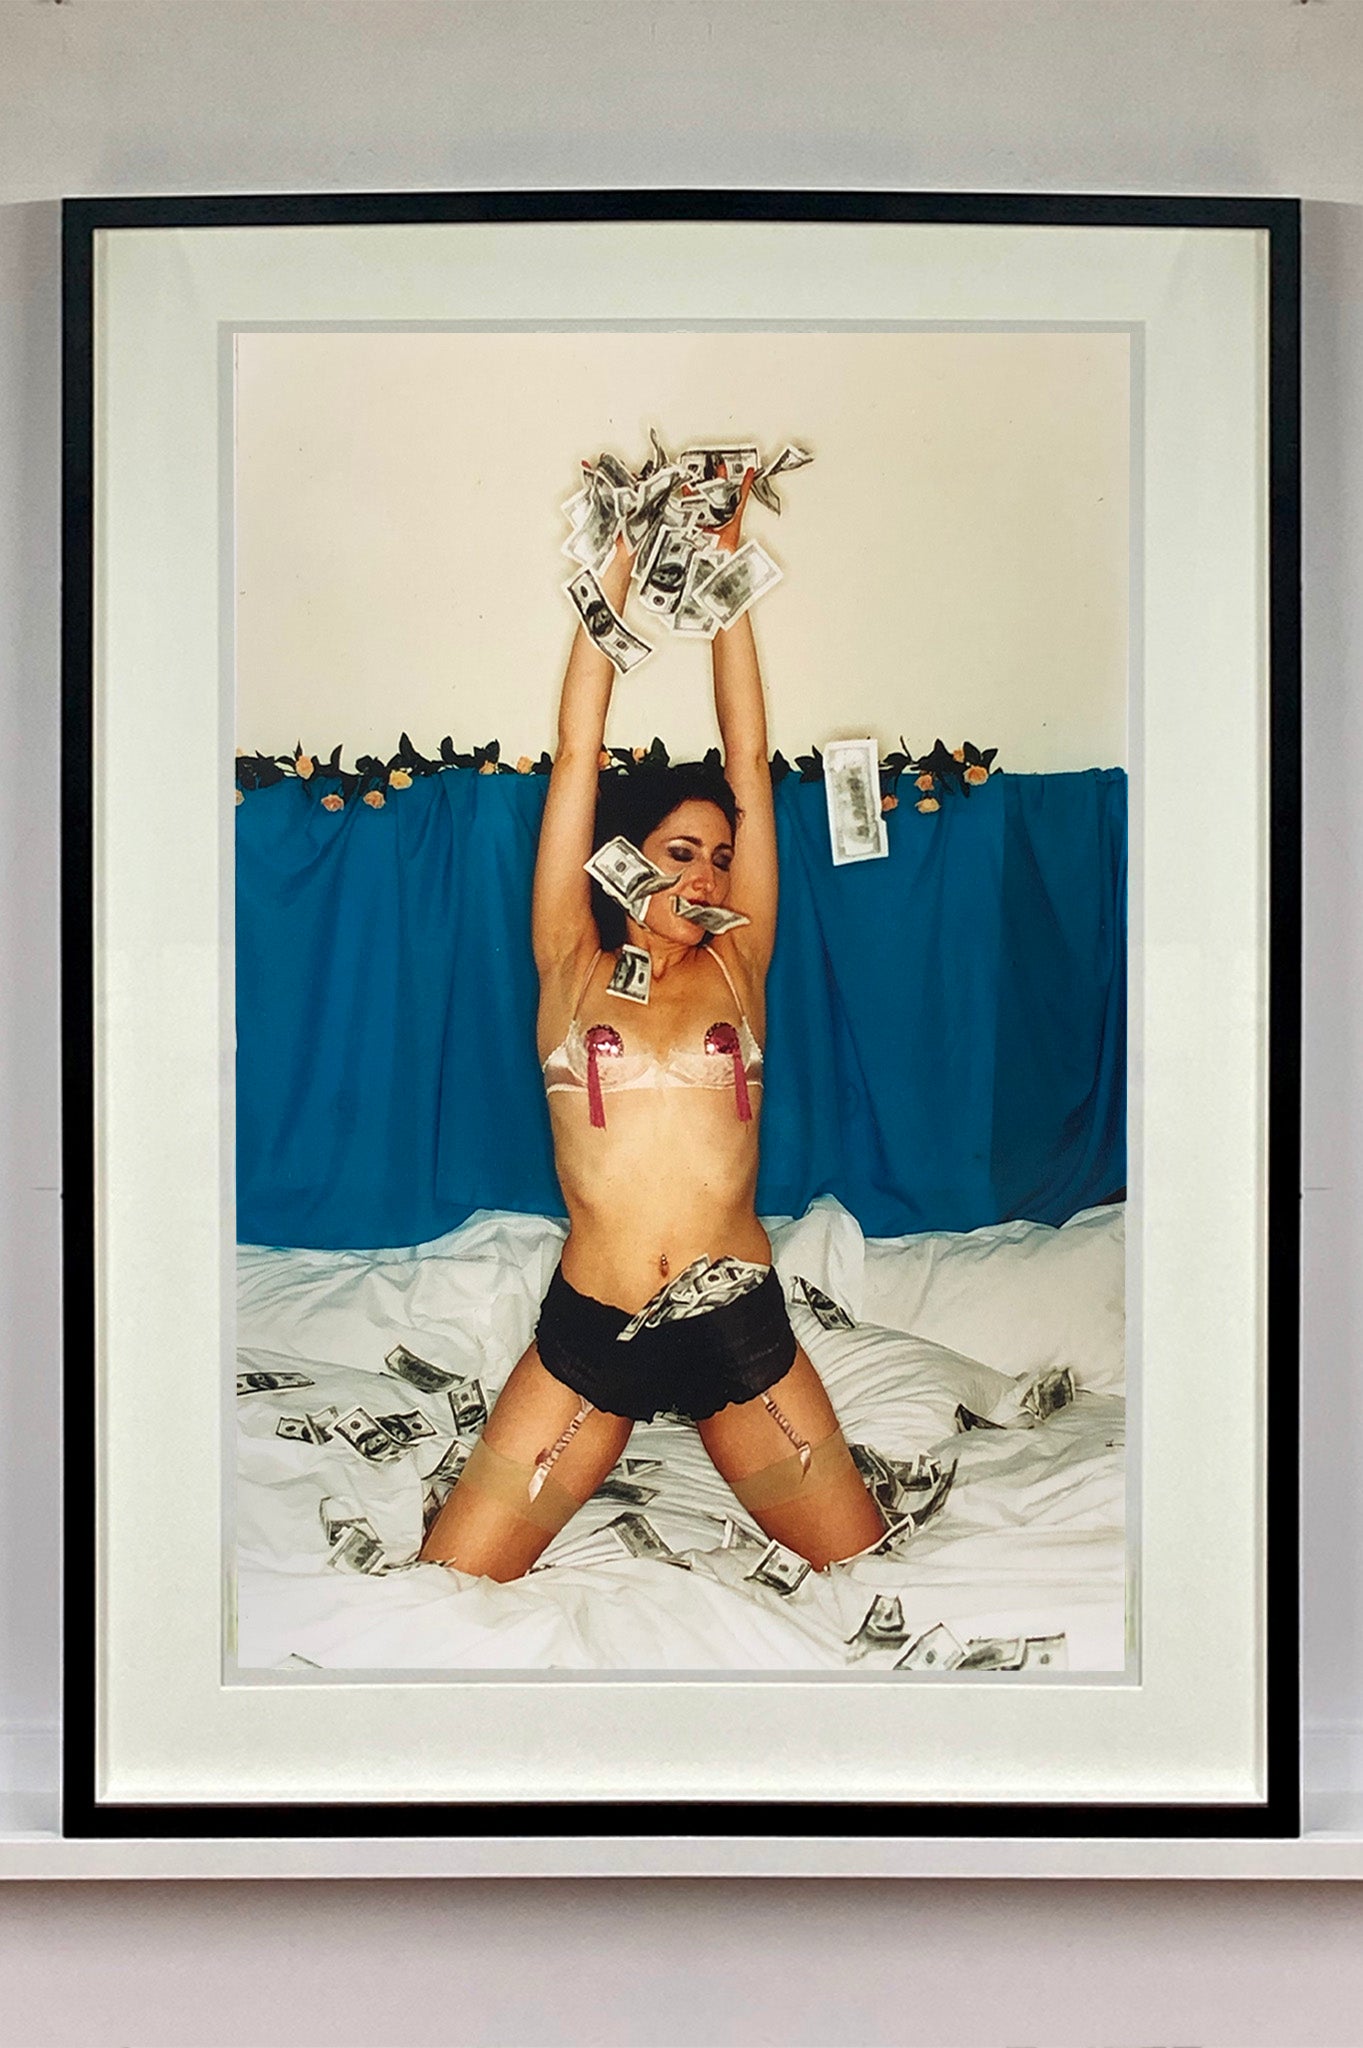 Delilah 'Red Right Hand I', "The Whoopee Club" London was taken in 2003 when Richard Heeps became well-known for his Burlesque Photography, after he spent time capturing performances in Britain & America. 